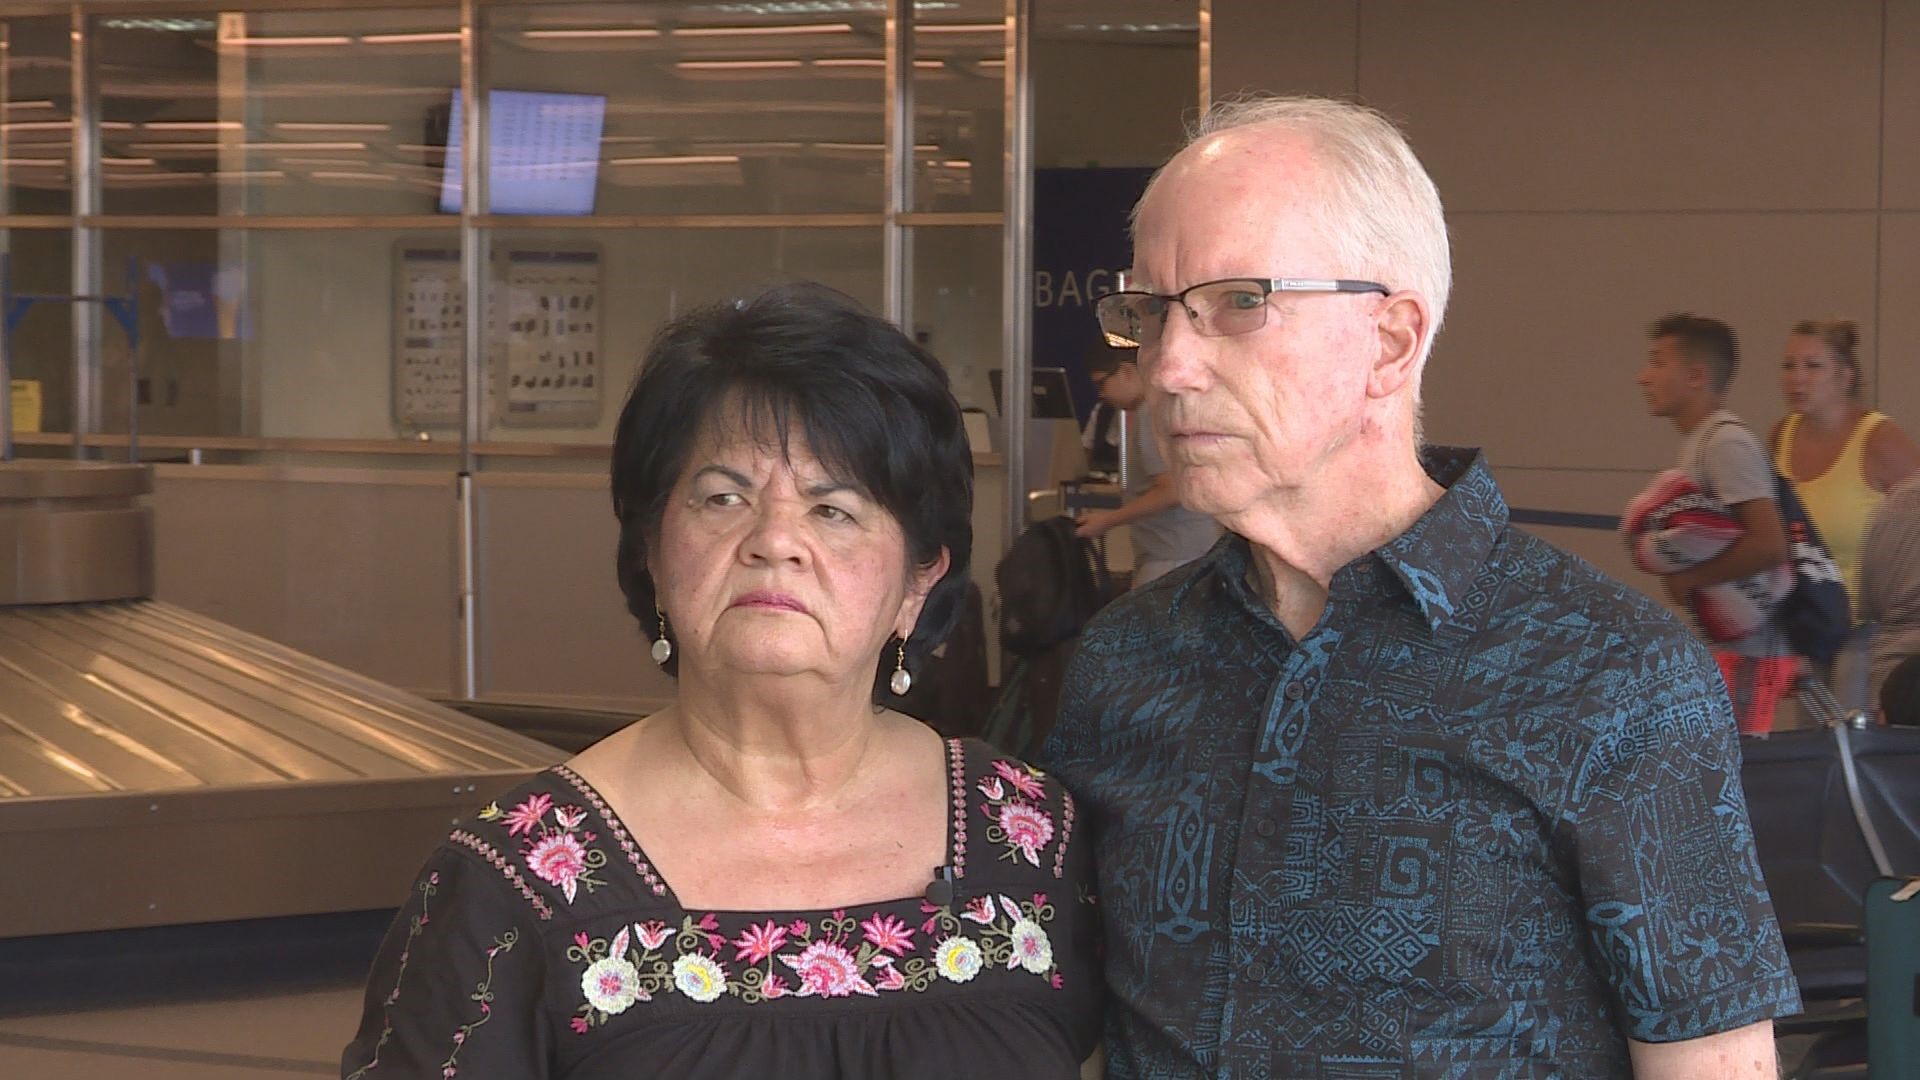 34 years ago their daughter disappeared in Greeley. Last week, the parents of Jonelle Matthews got a phone call they had been waiting for for decades. Their daughter's remains had been found.